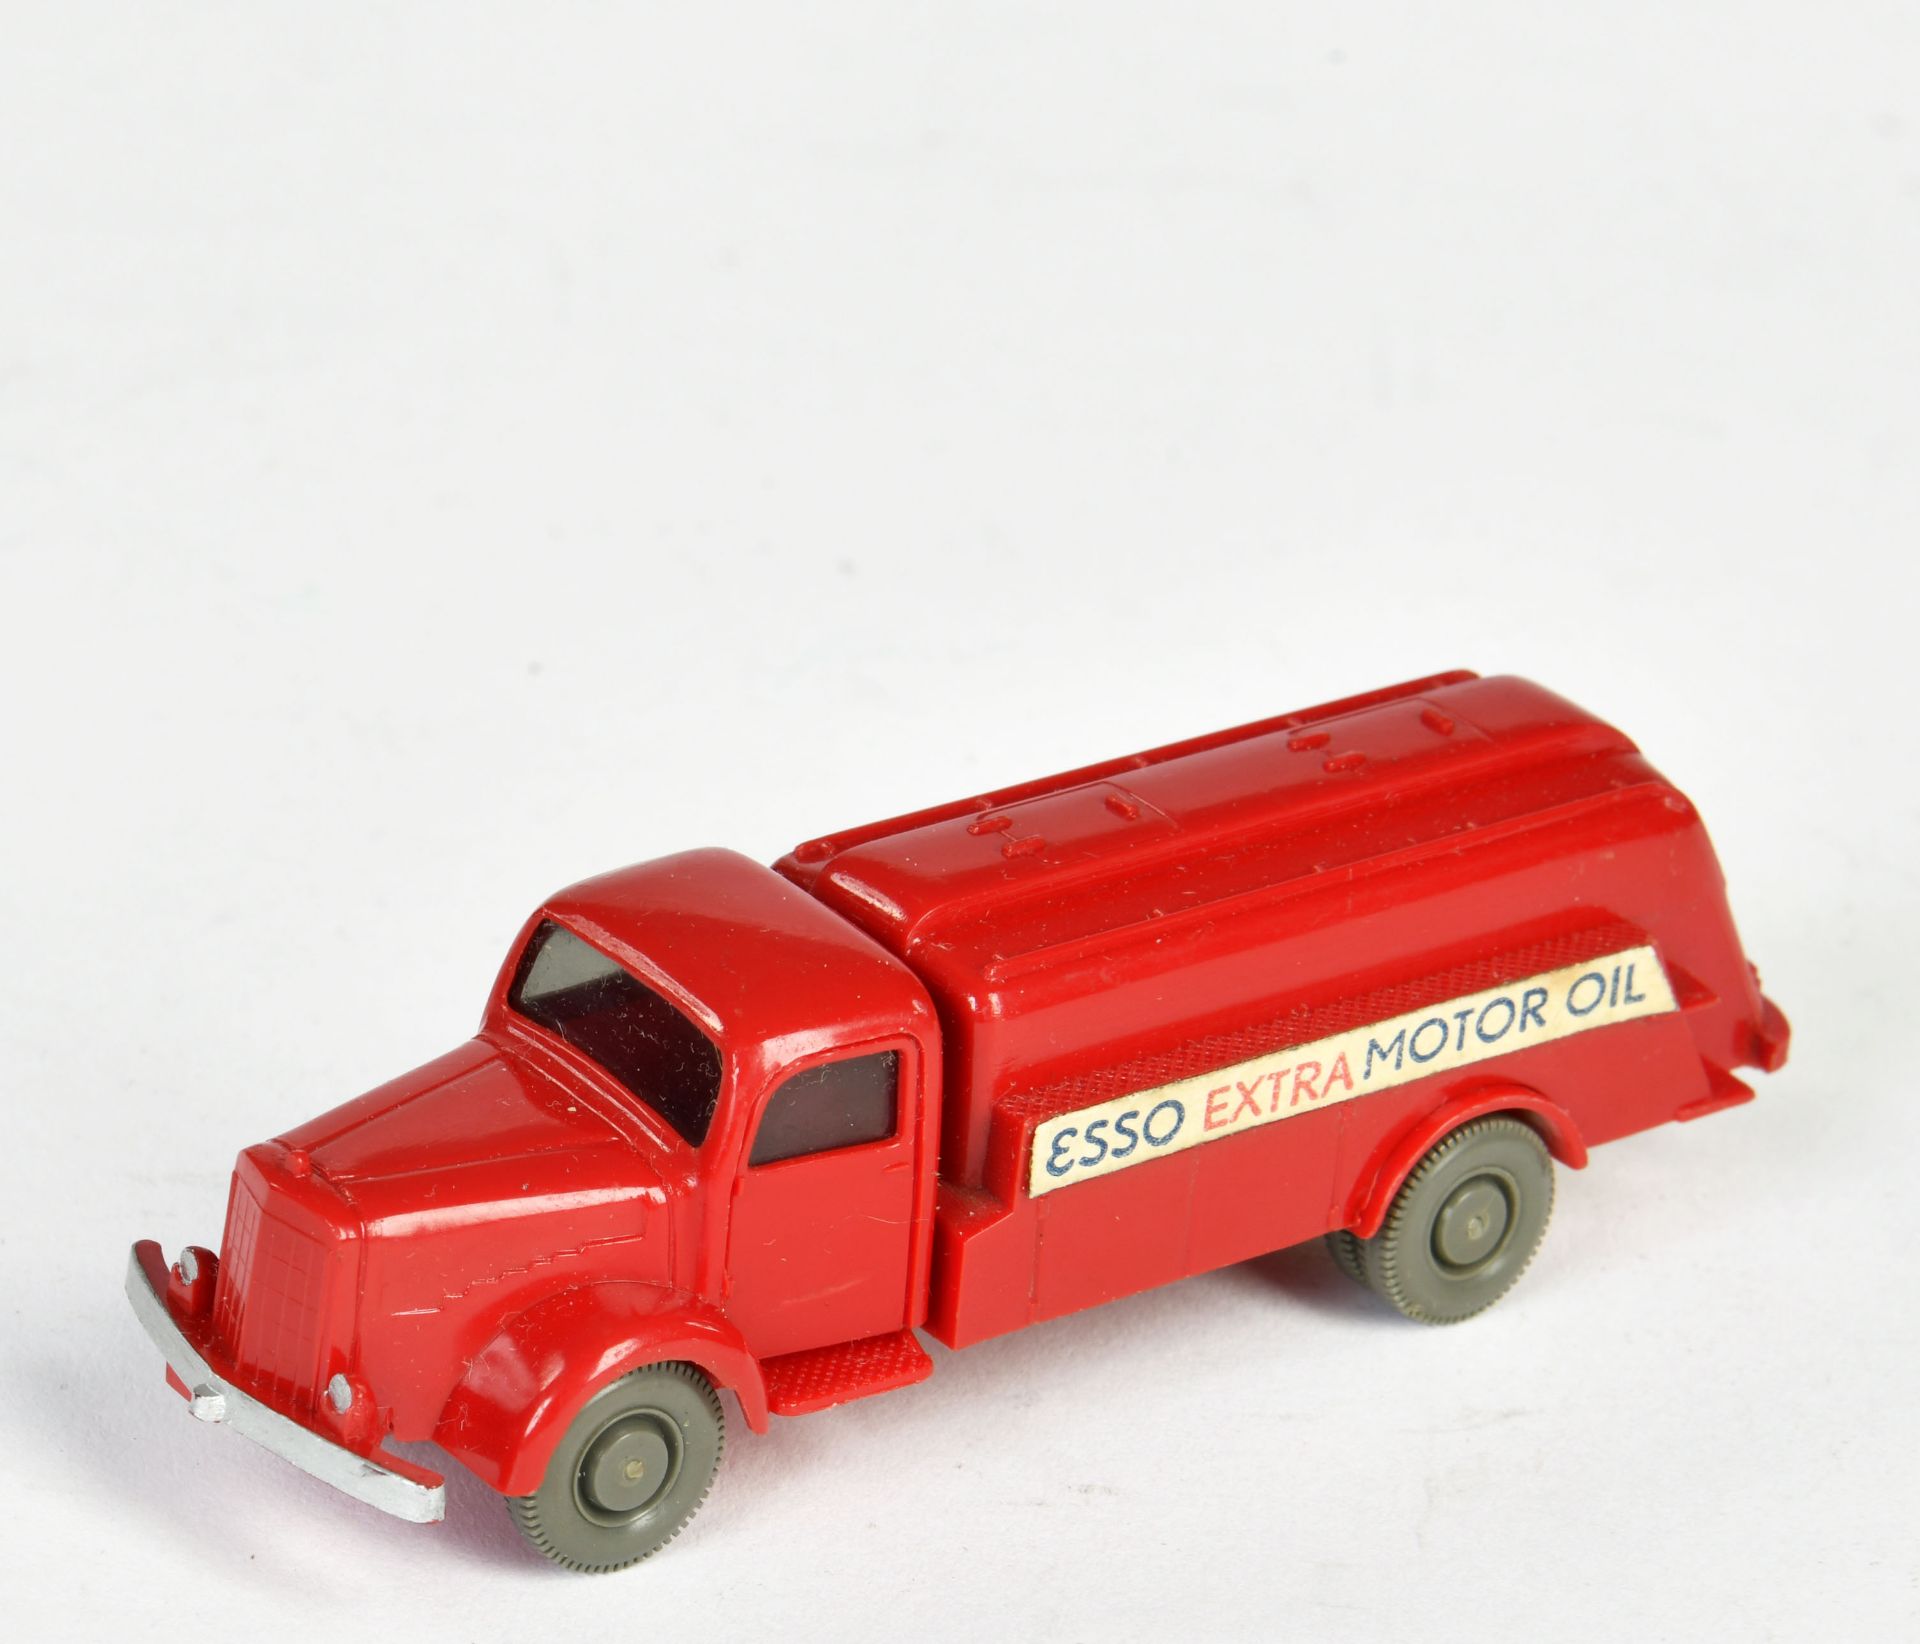 Wiking, 933/4 Esso tank truck MB 5000, 1:87, small scratches, otherwise very good